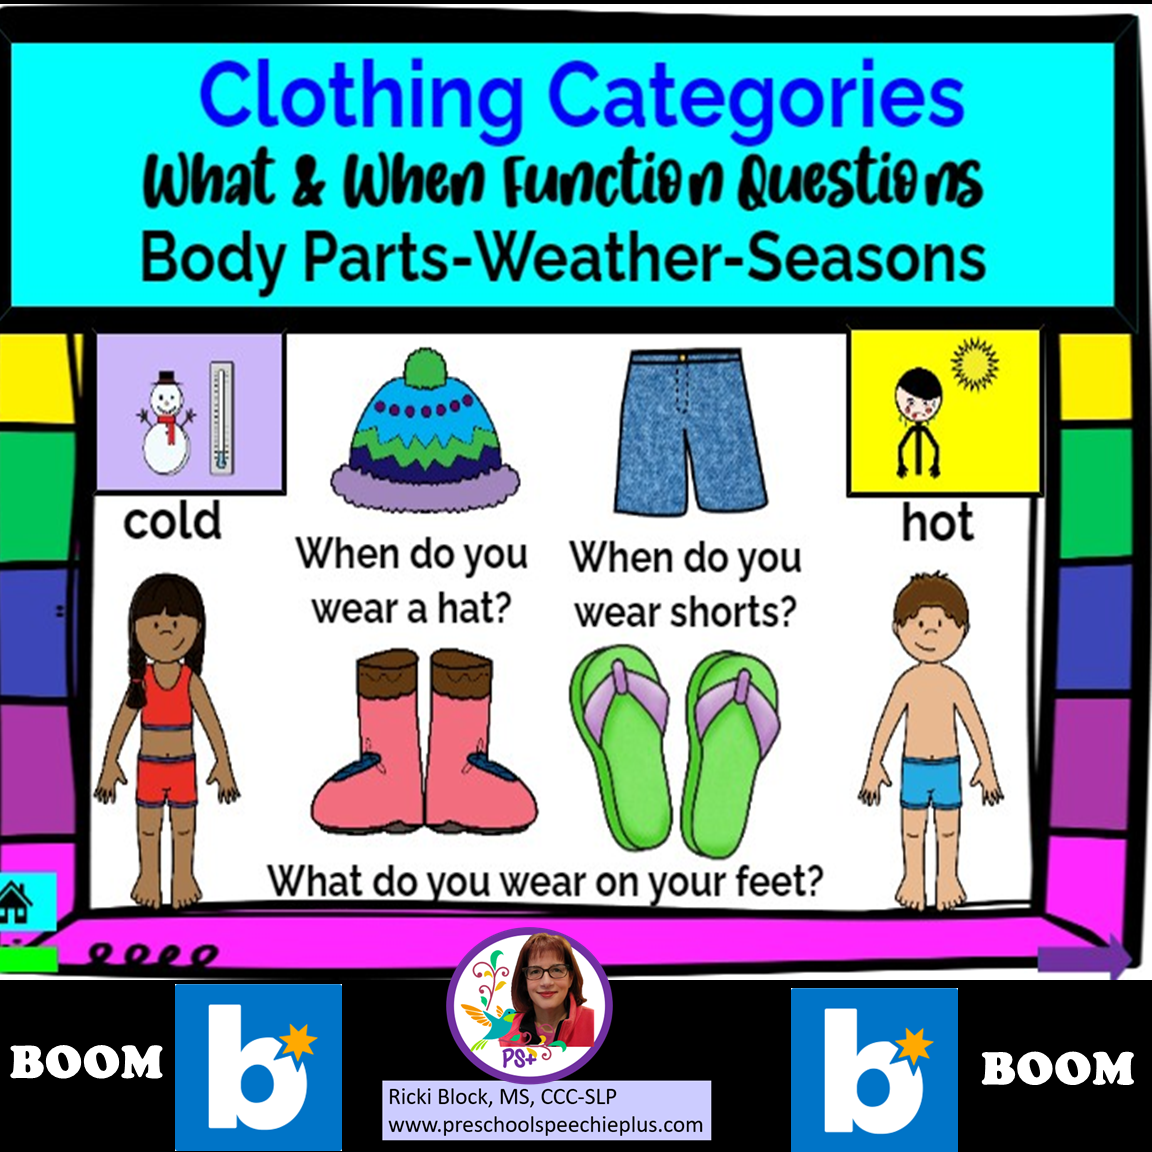 Clothing Categories cOVER NEW.png